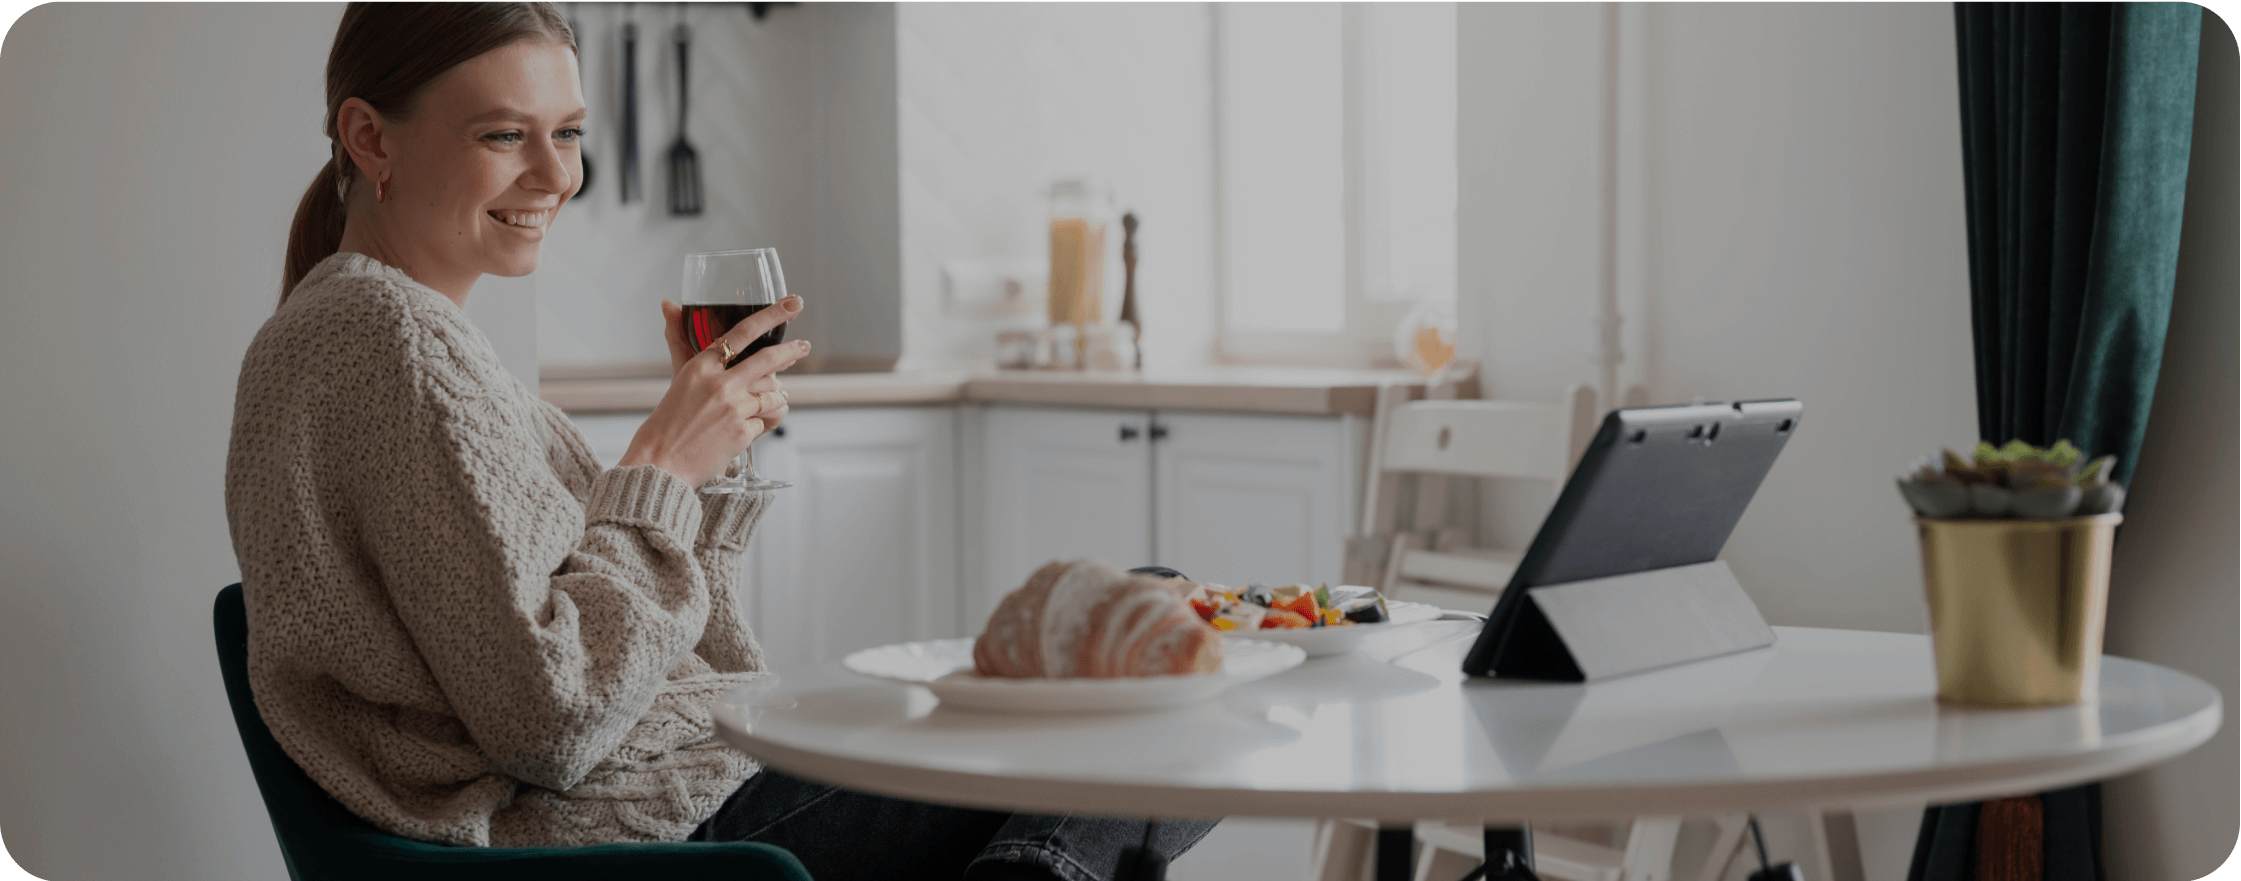 A girl, with a glass of wine in her hand, is having breakfast and looking at the tablet.